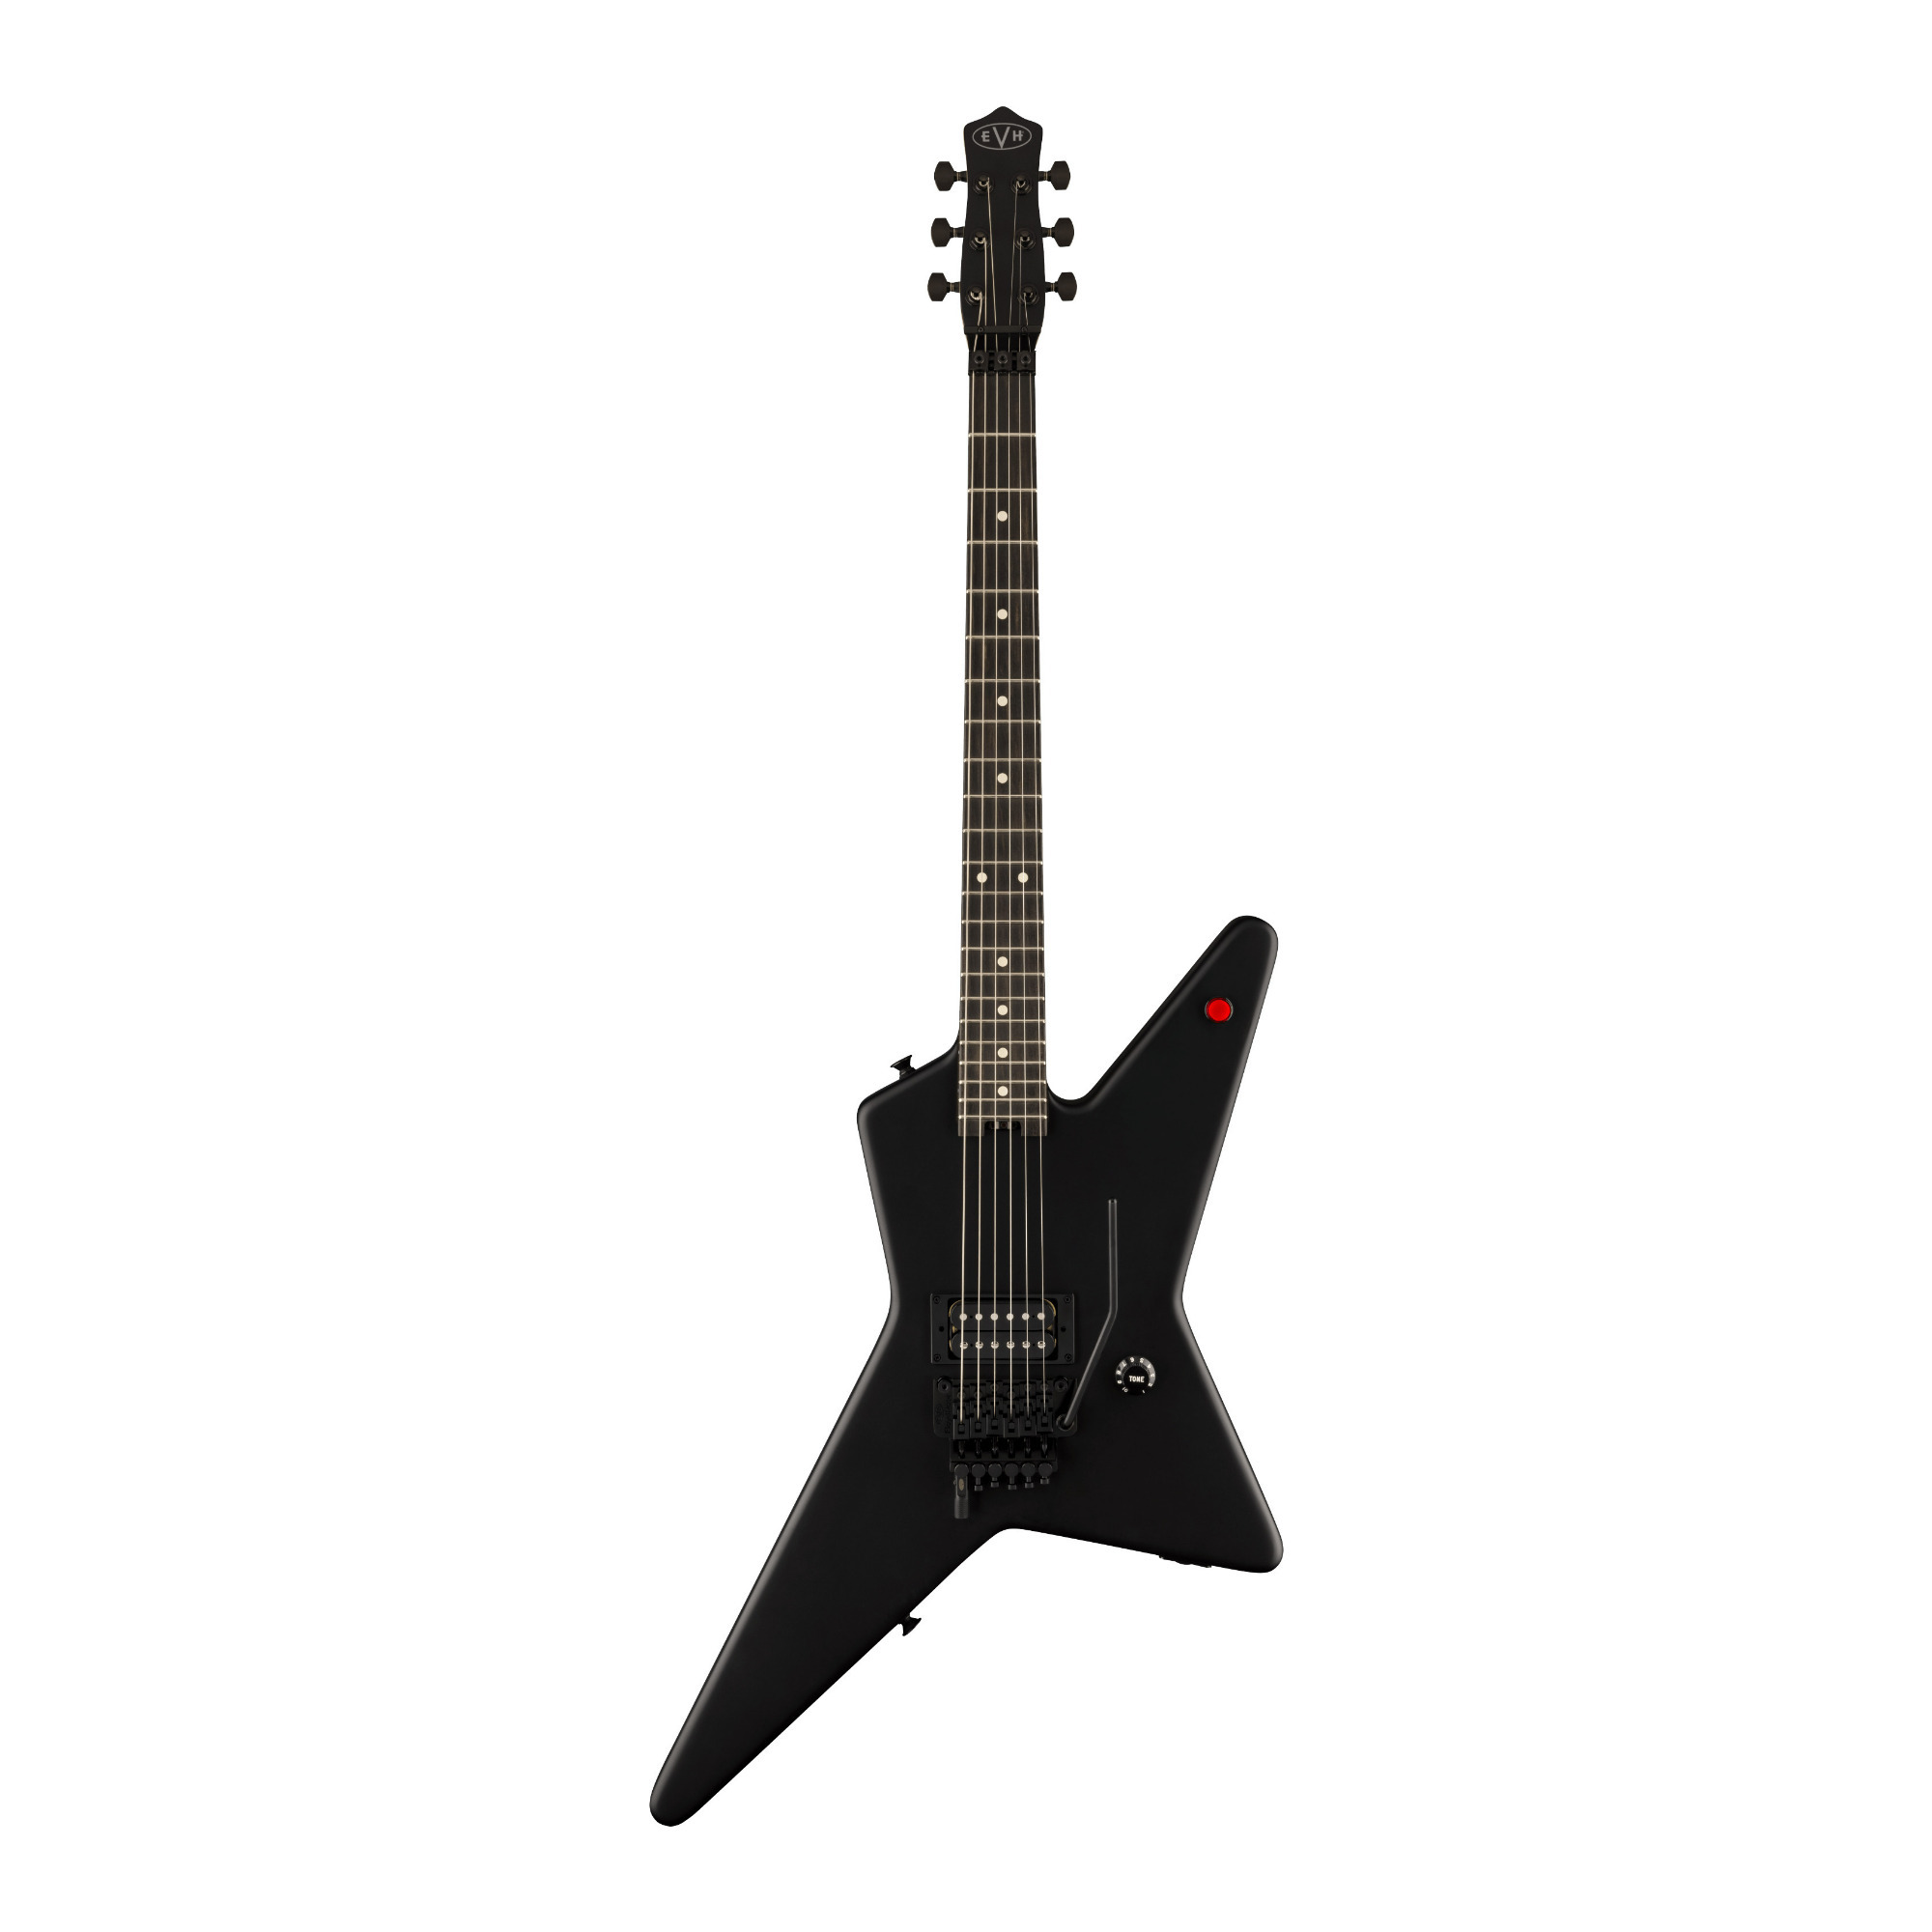 EVH Limited Star Series 6-String Electric Guitar with Wolfgang Humbucker (Stealth Black) -  5108007568